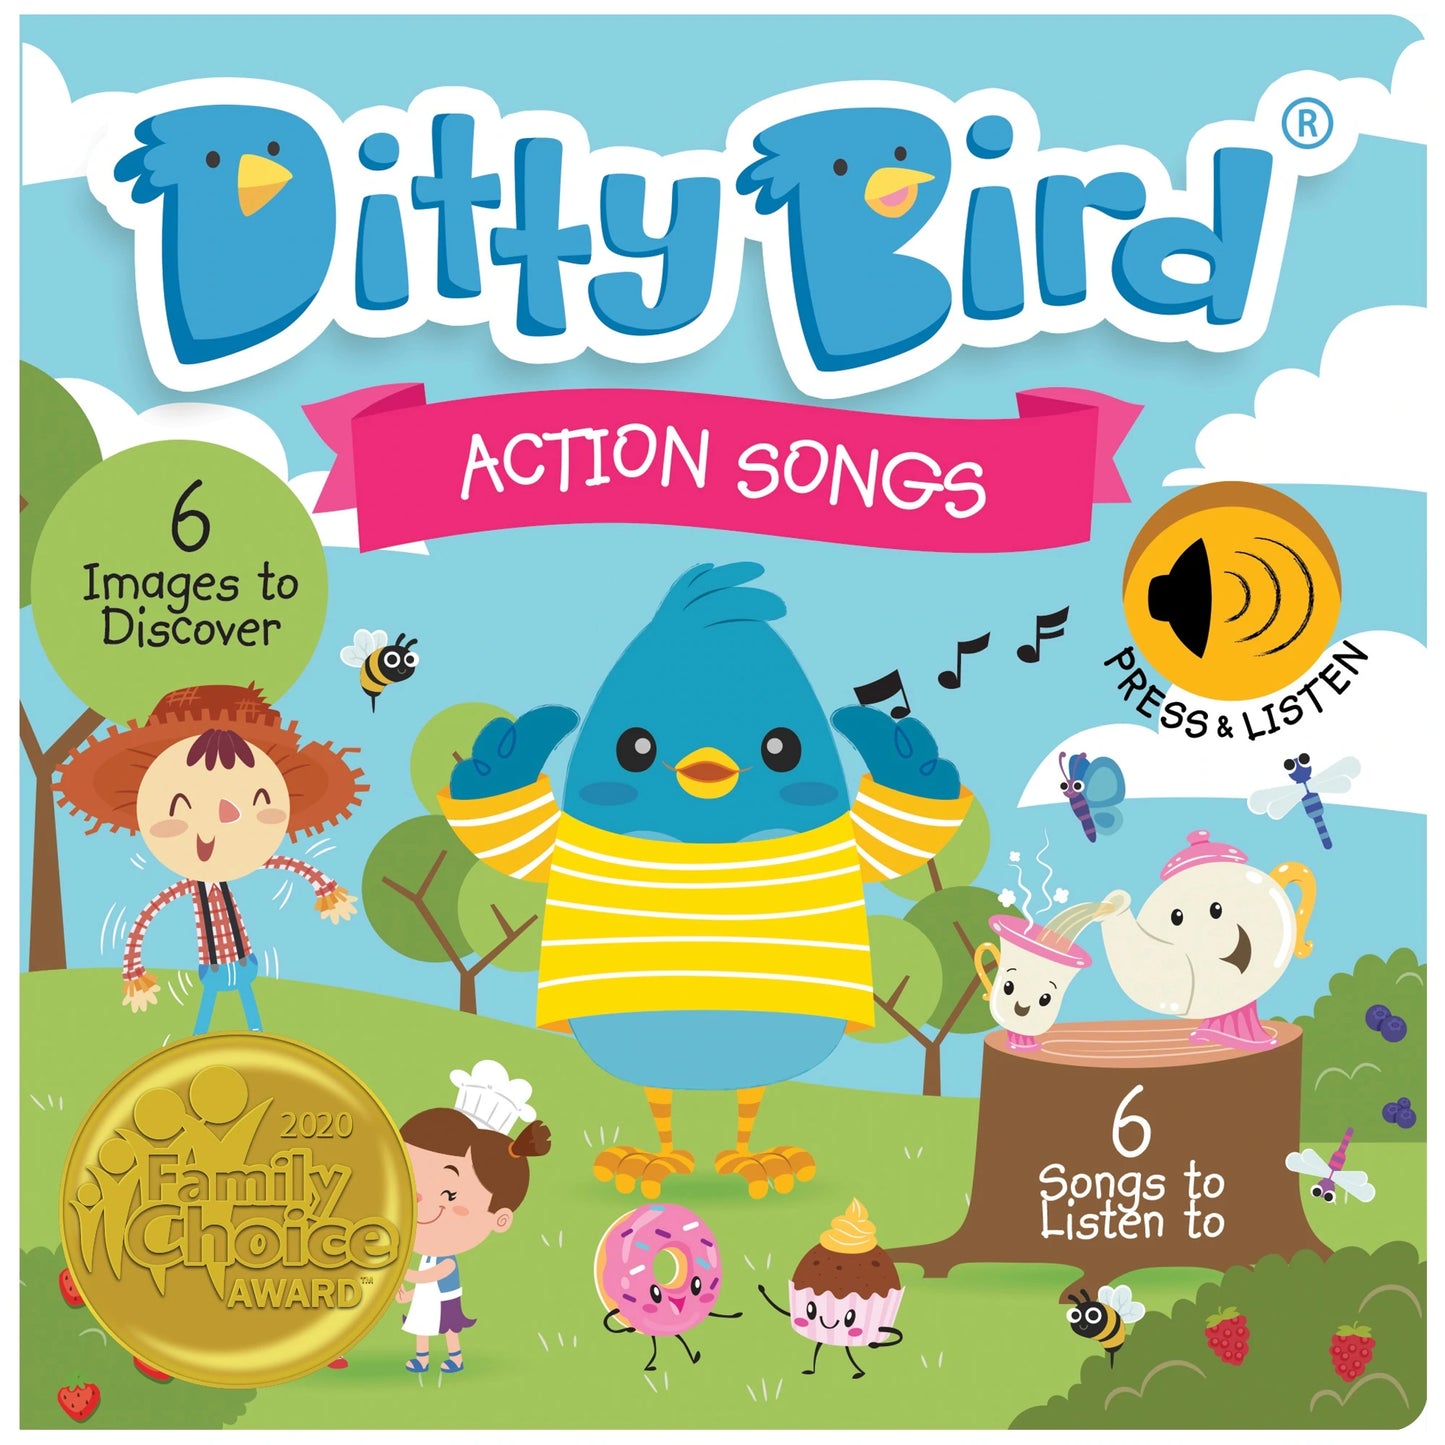 ✅Ditty Bird - Action Songs